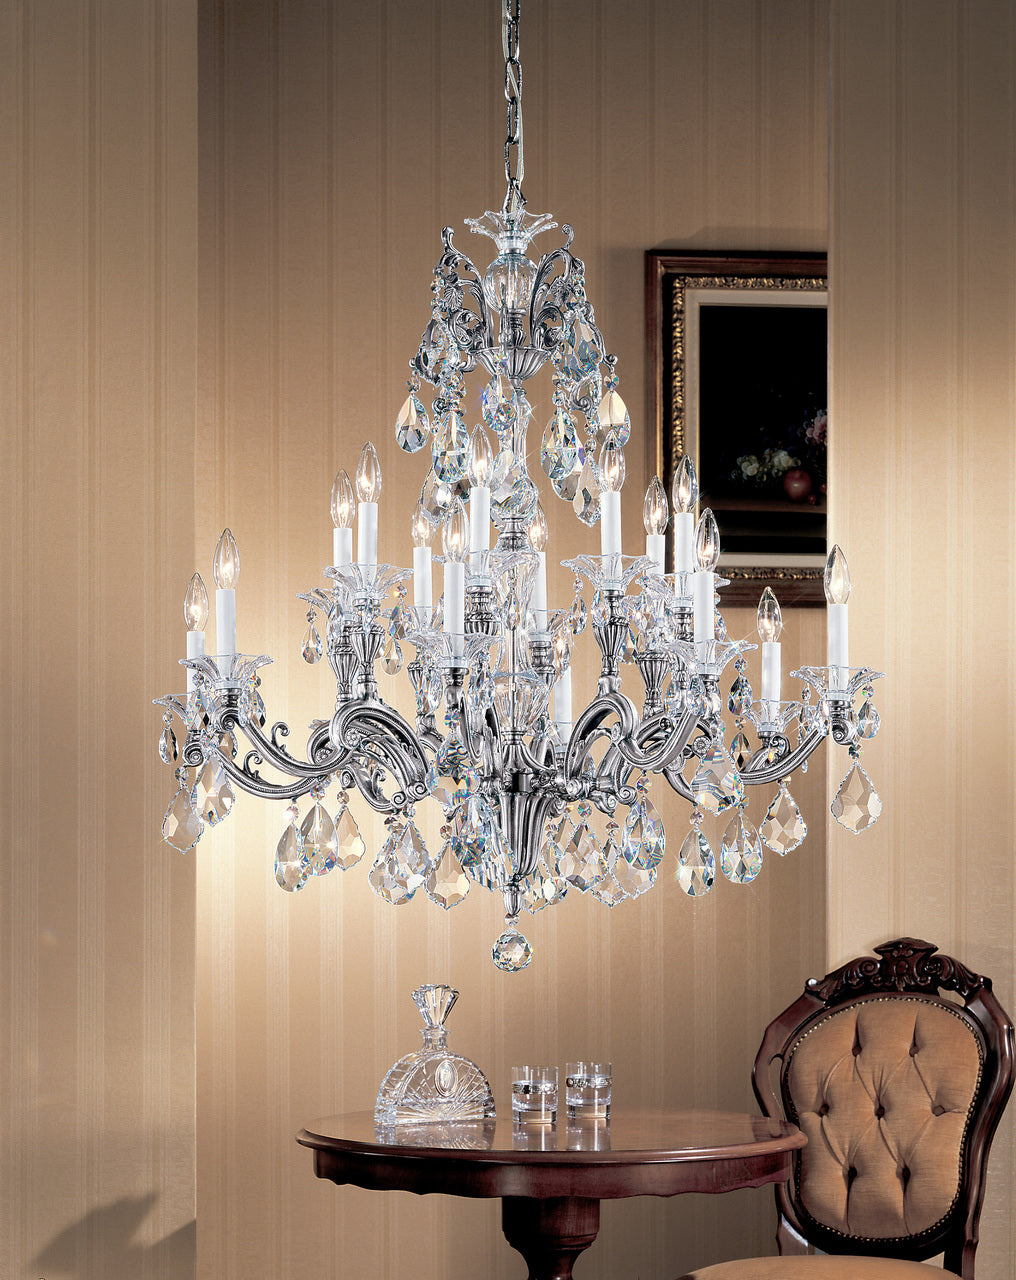 Classic Lighting 57116 MS SJT Via Firenze Crystal Chandelier in Millennium Silver (Imported from Spain)